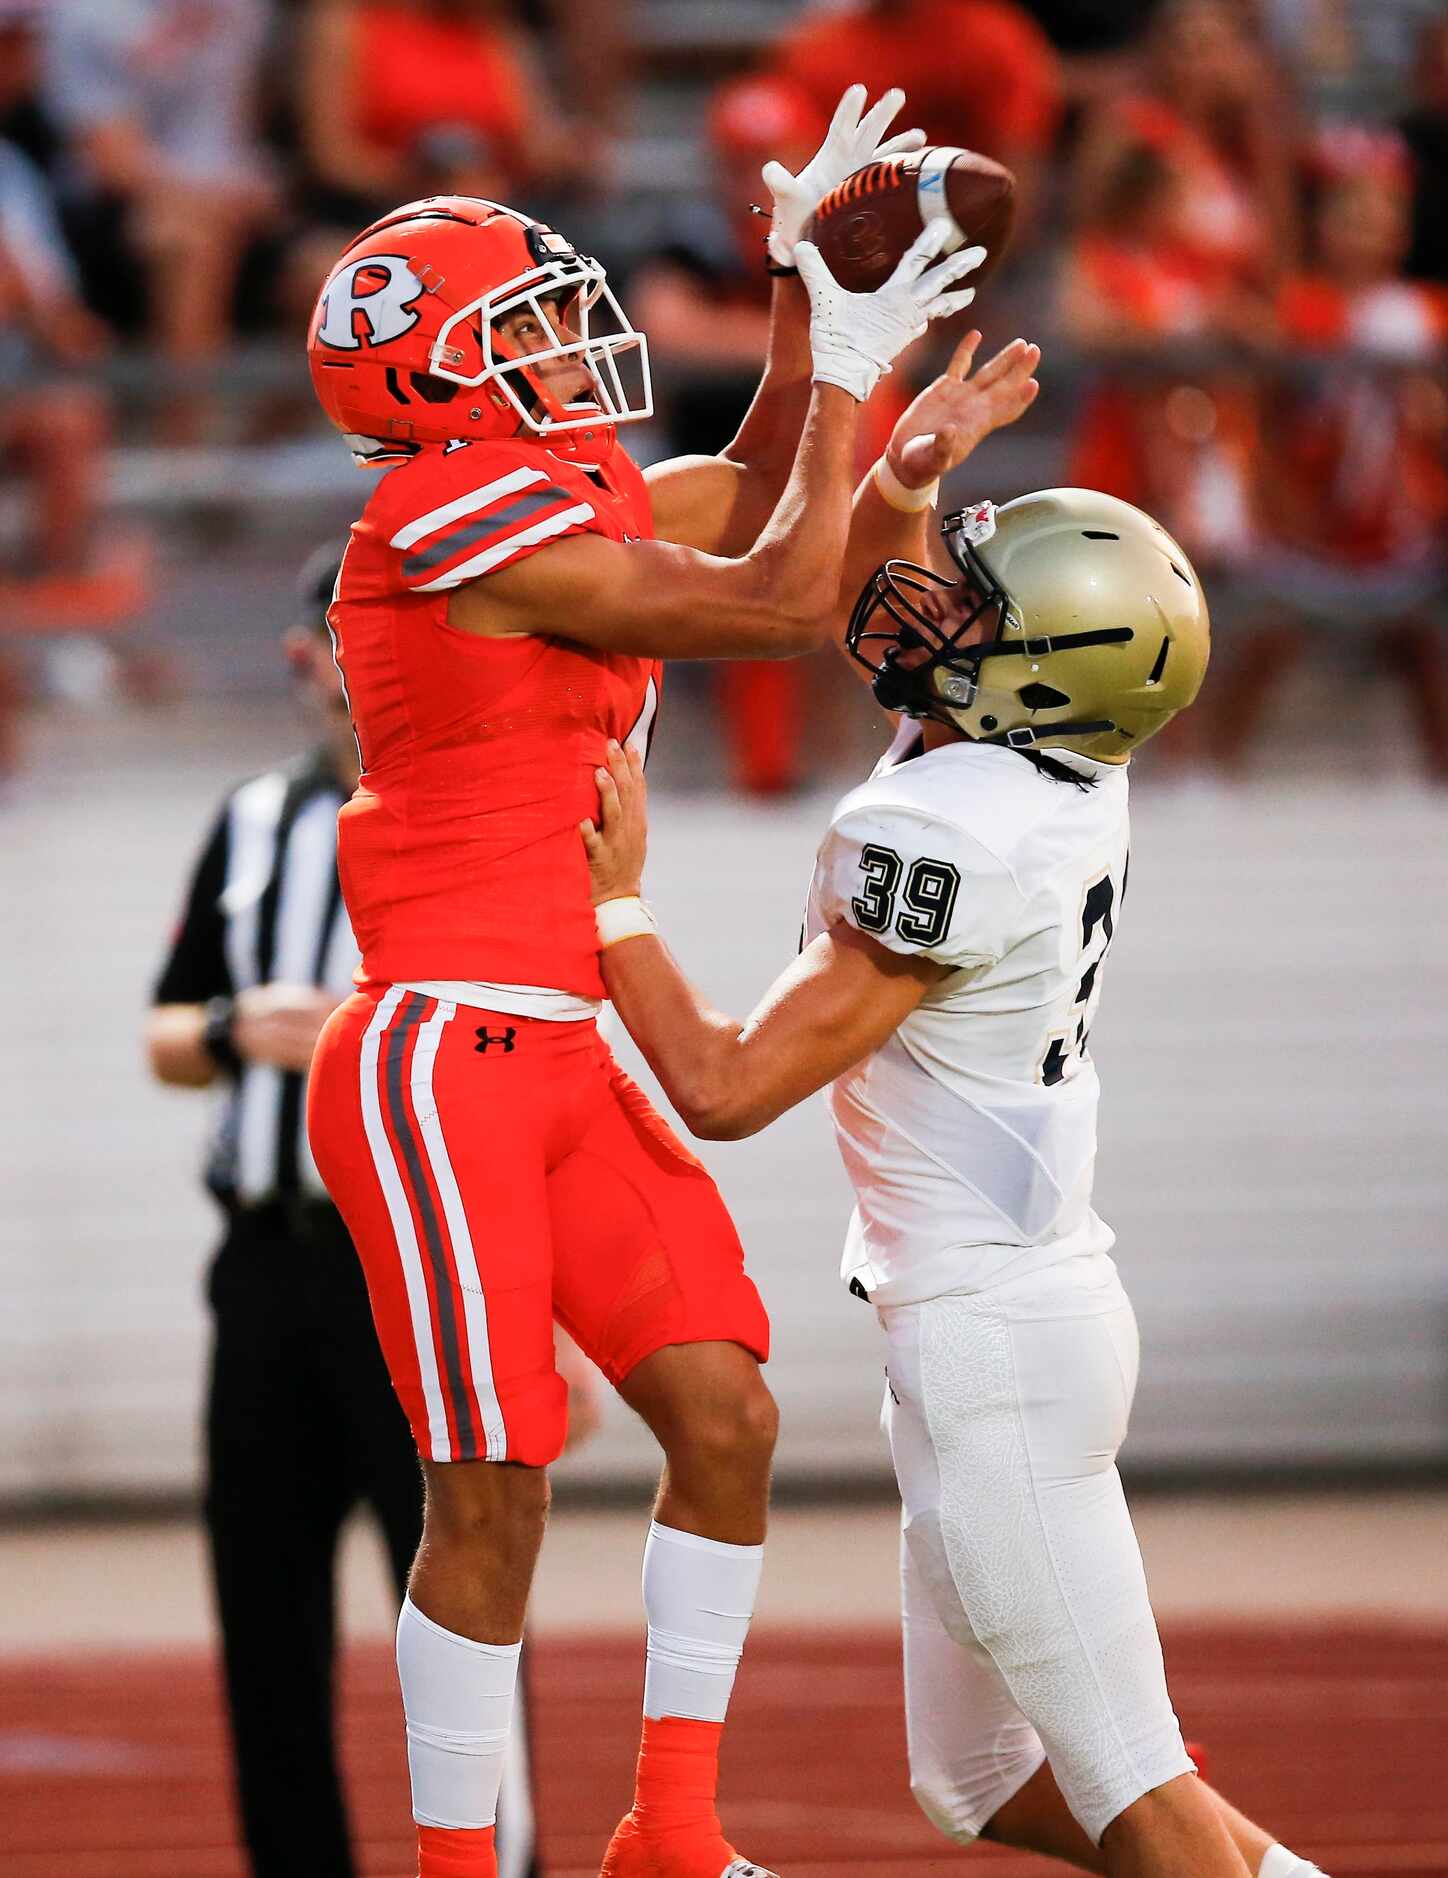 Rockwall junior wide receiver Aiden Meeks (1) catches a pass as Jesuit sophomore defensive...